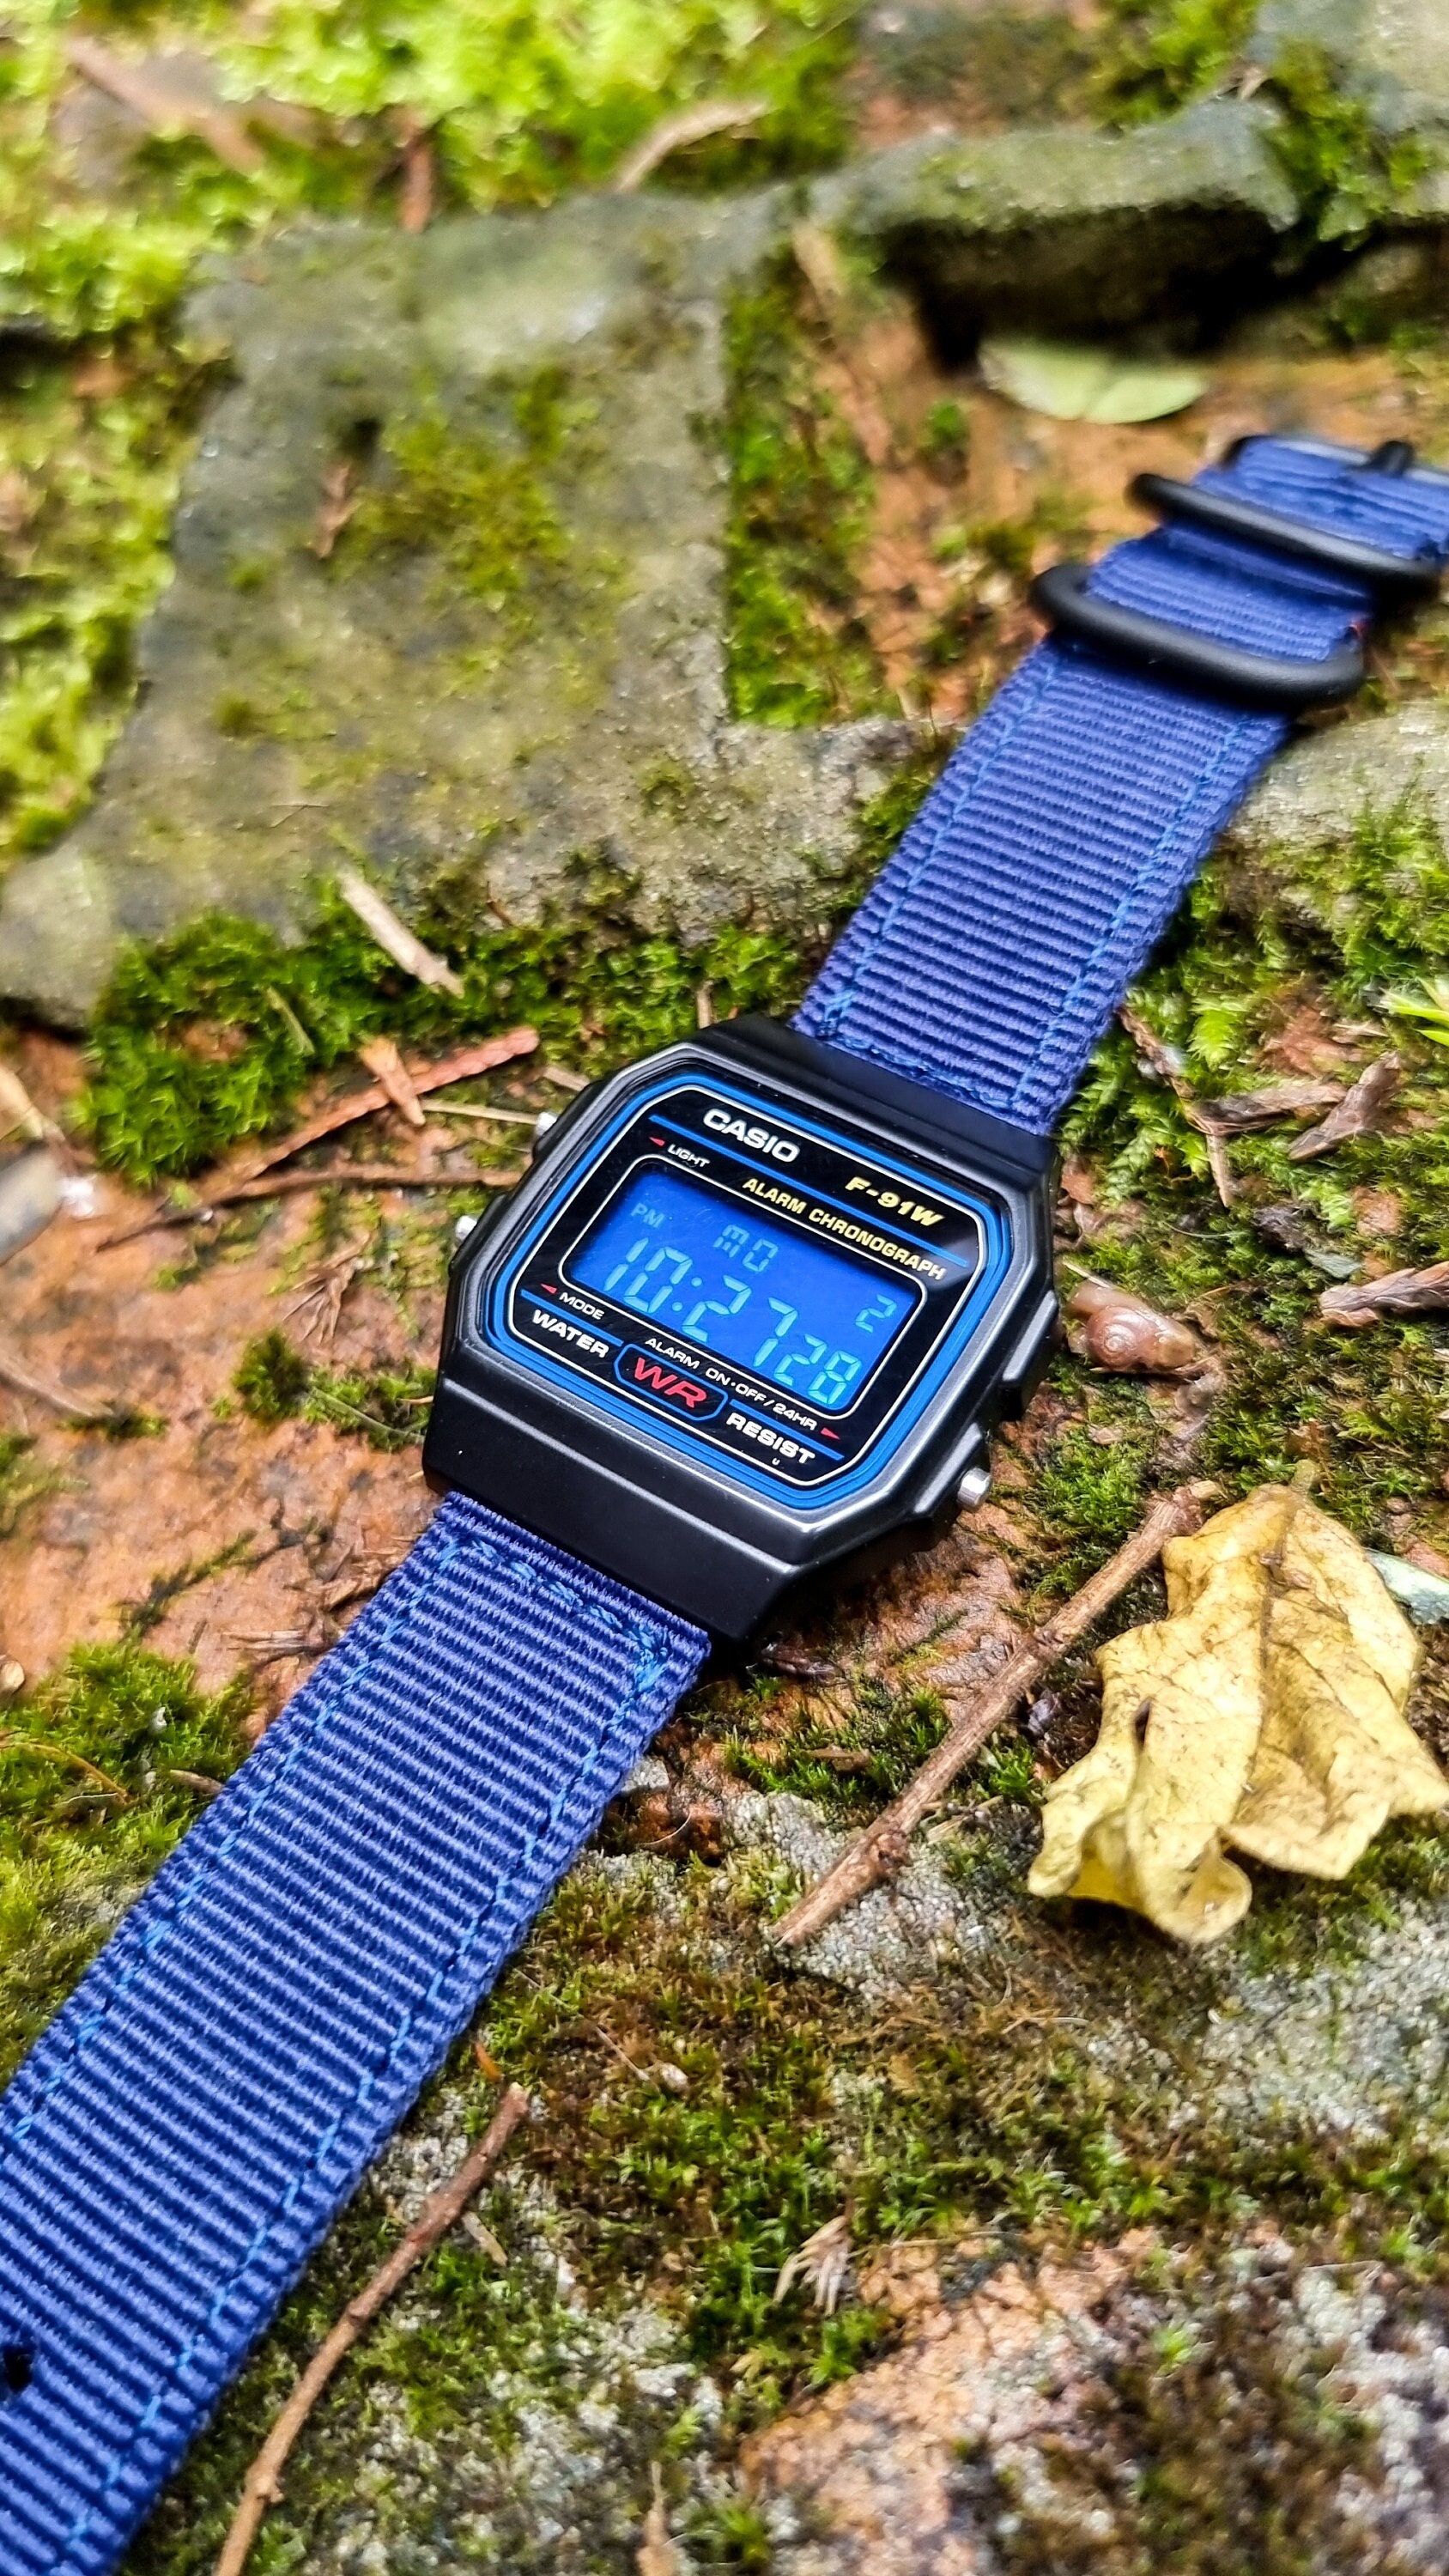 Is the classic F-91 stylish? Does it suit work-wear? : r/casio